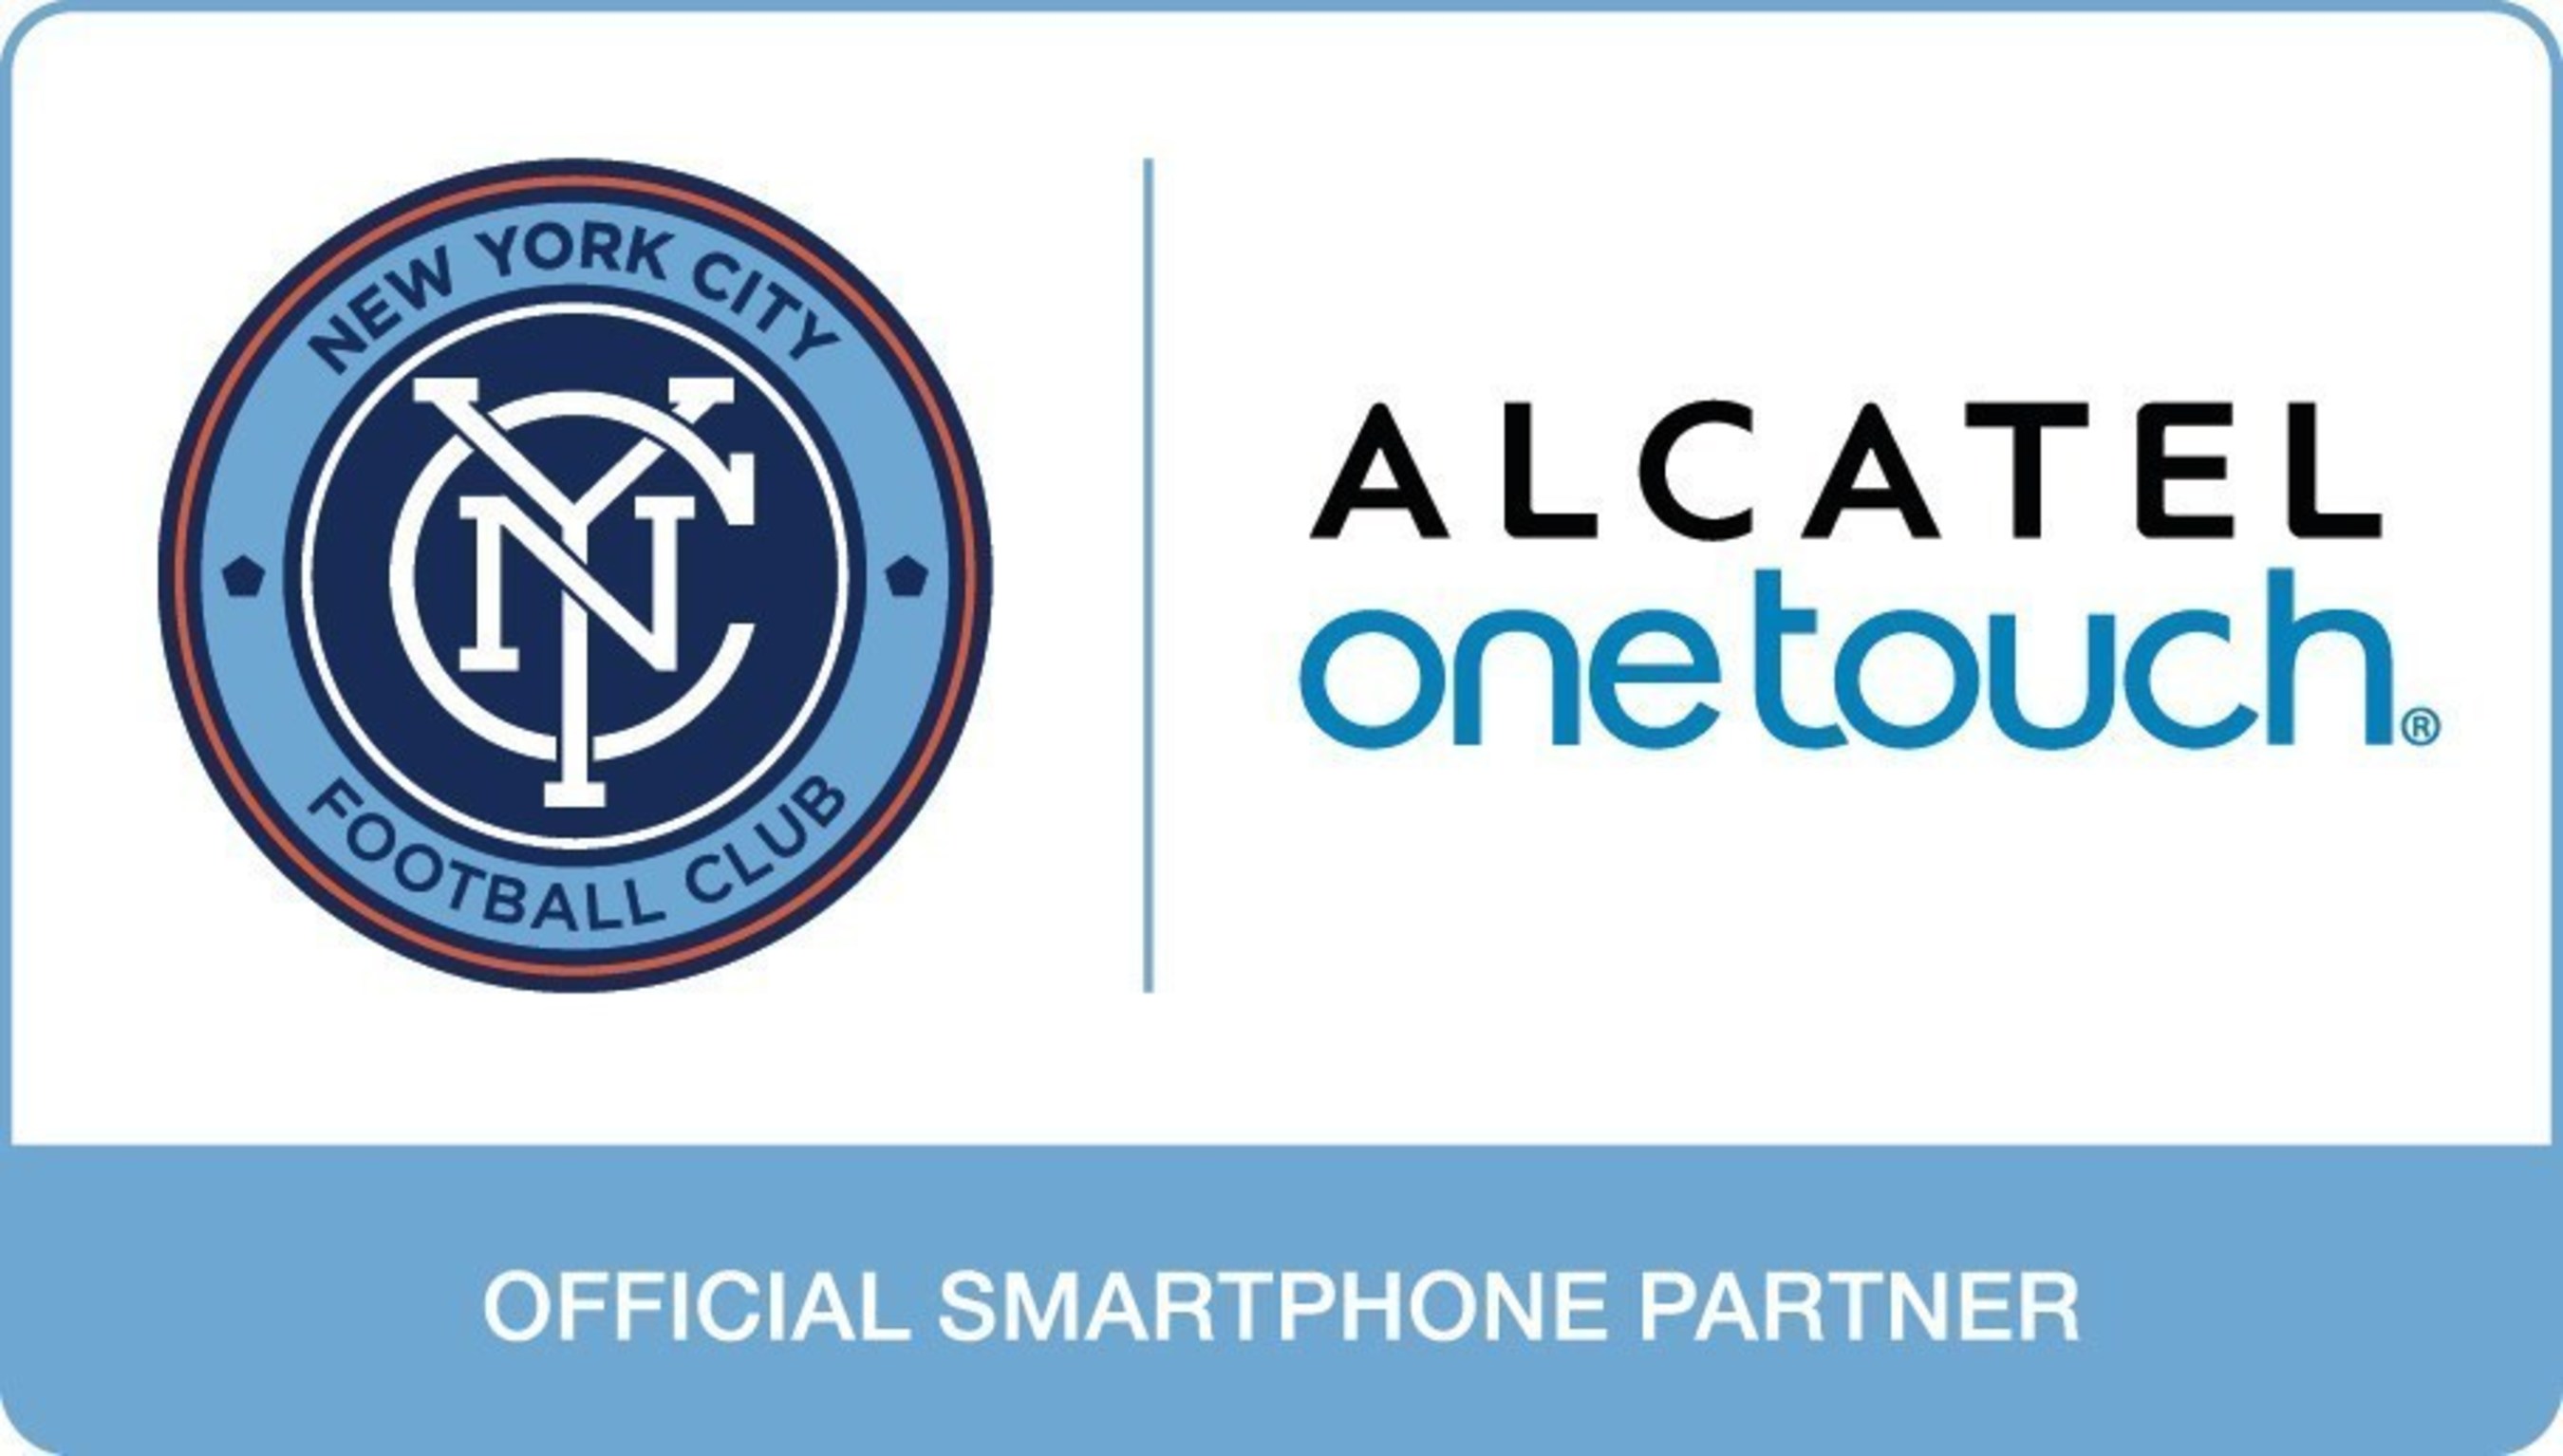 Alcatel Onetouch Continues Brand Partnership Expansion; Named The Official Smartphone Partner Of Major League Soccer's New York City Football Club